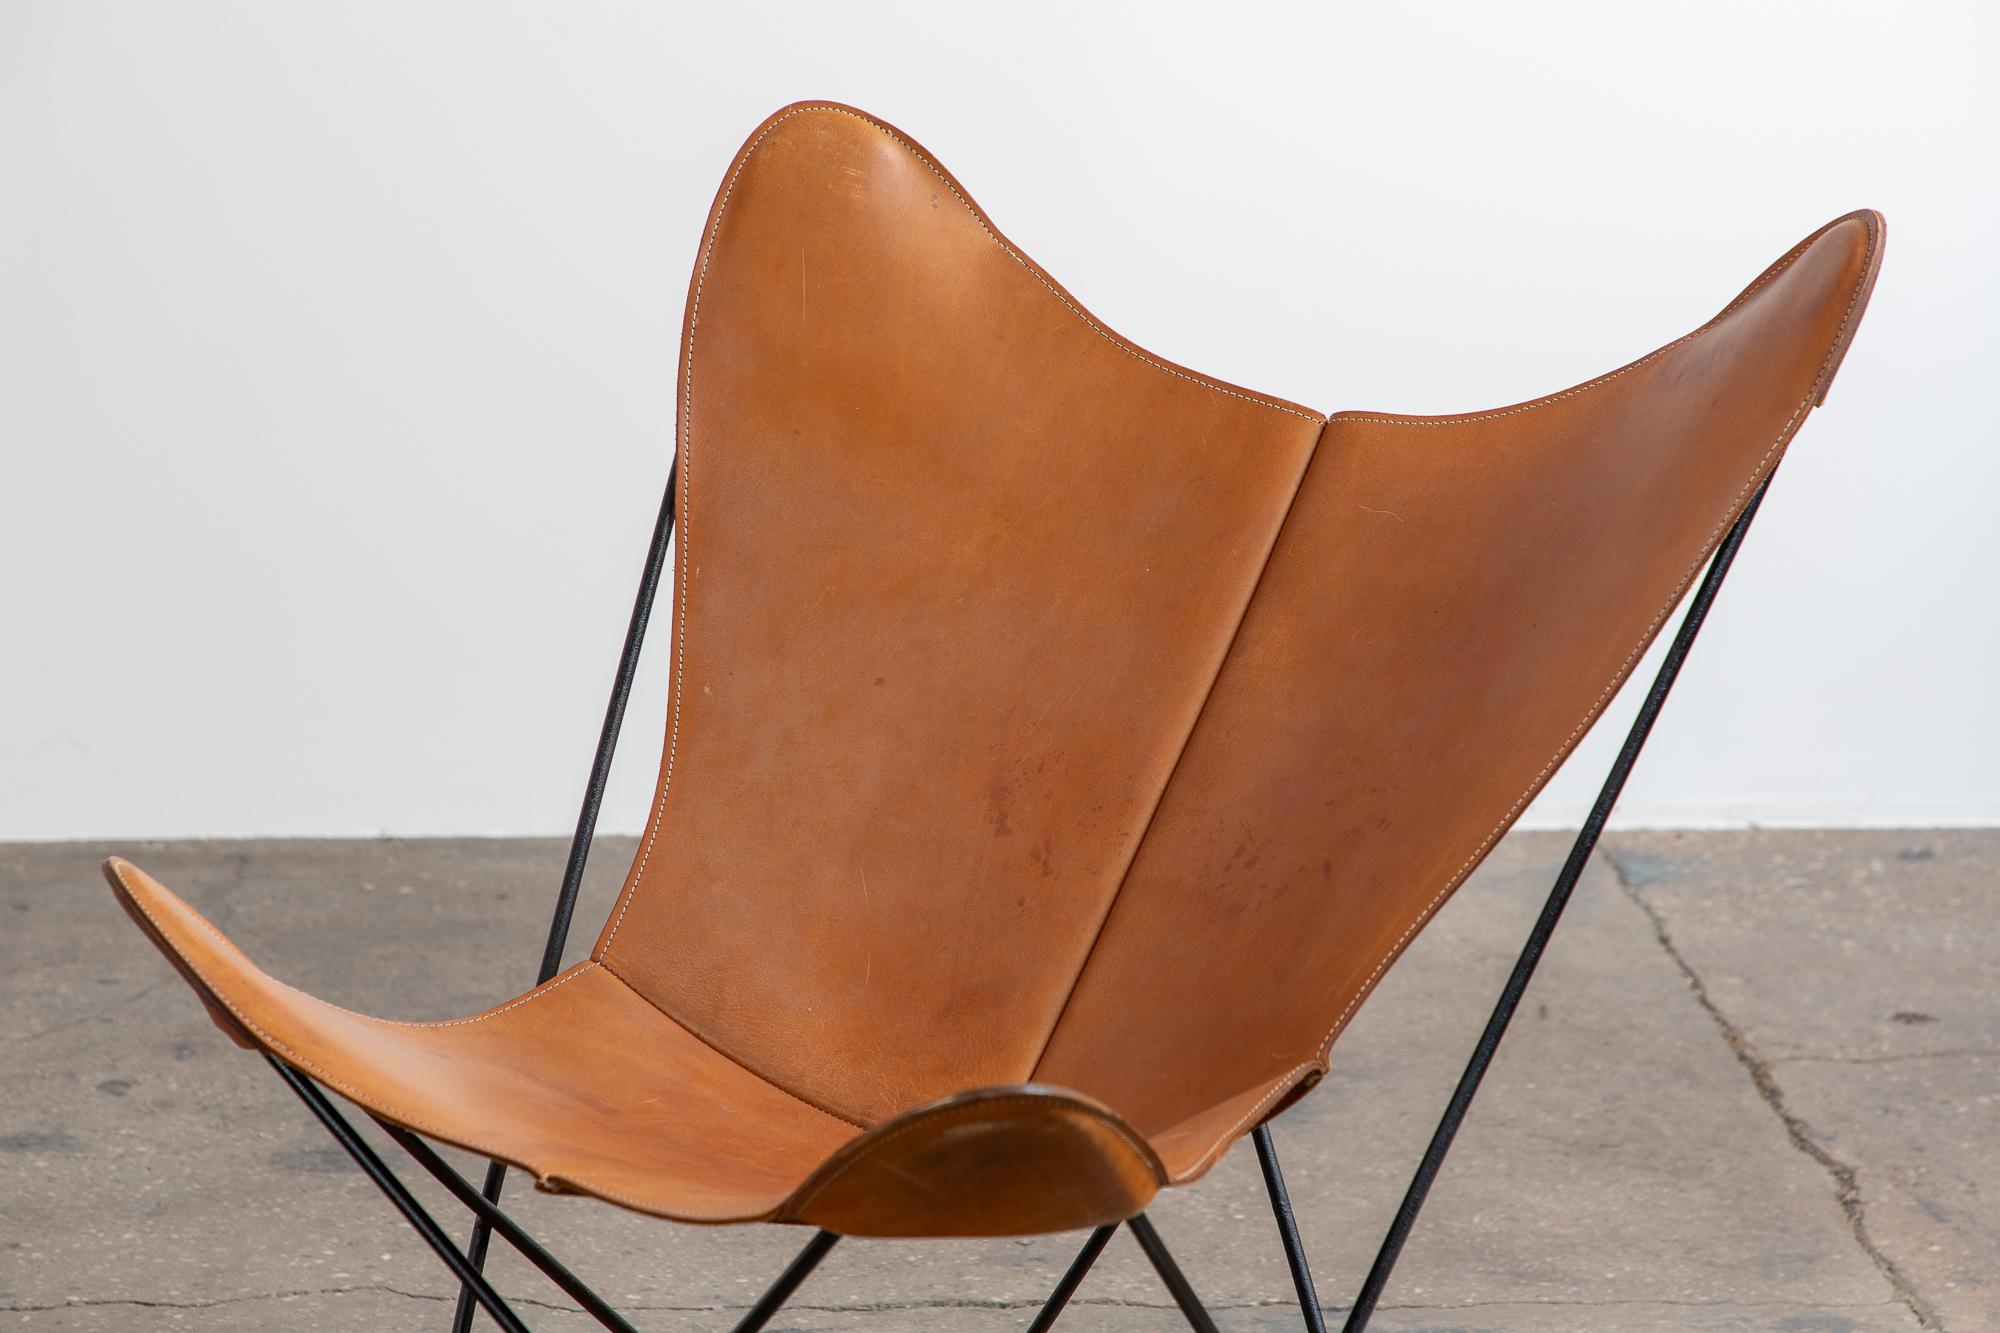 Welded Original Cognac Leather Hardoy Butterfly Chair, Issued by Knoll, 1950s For Sale